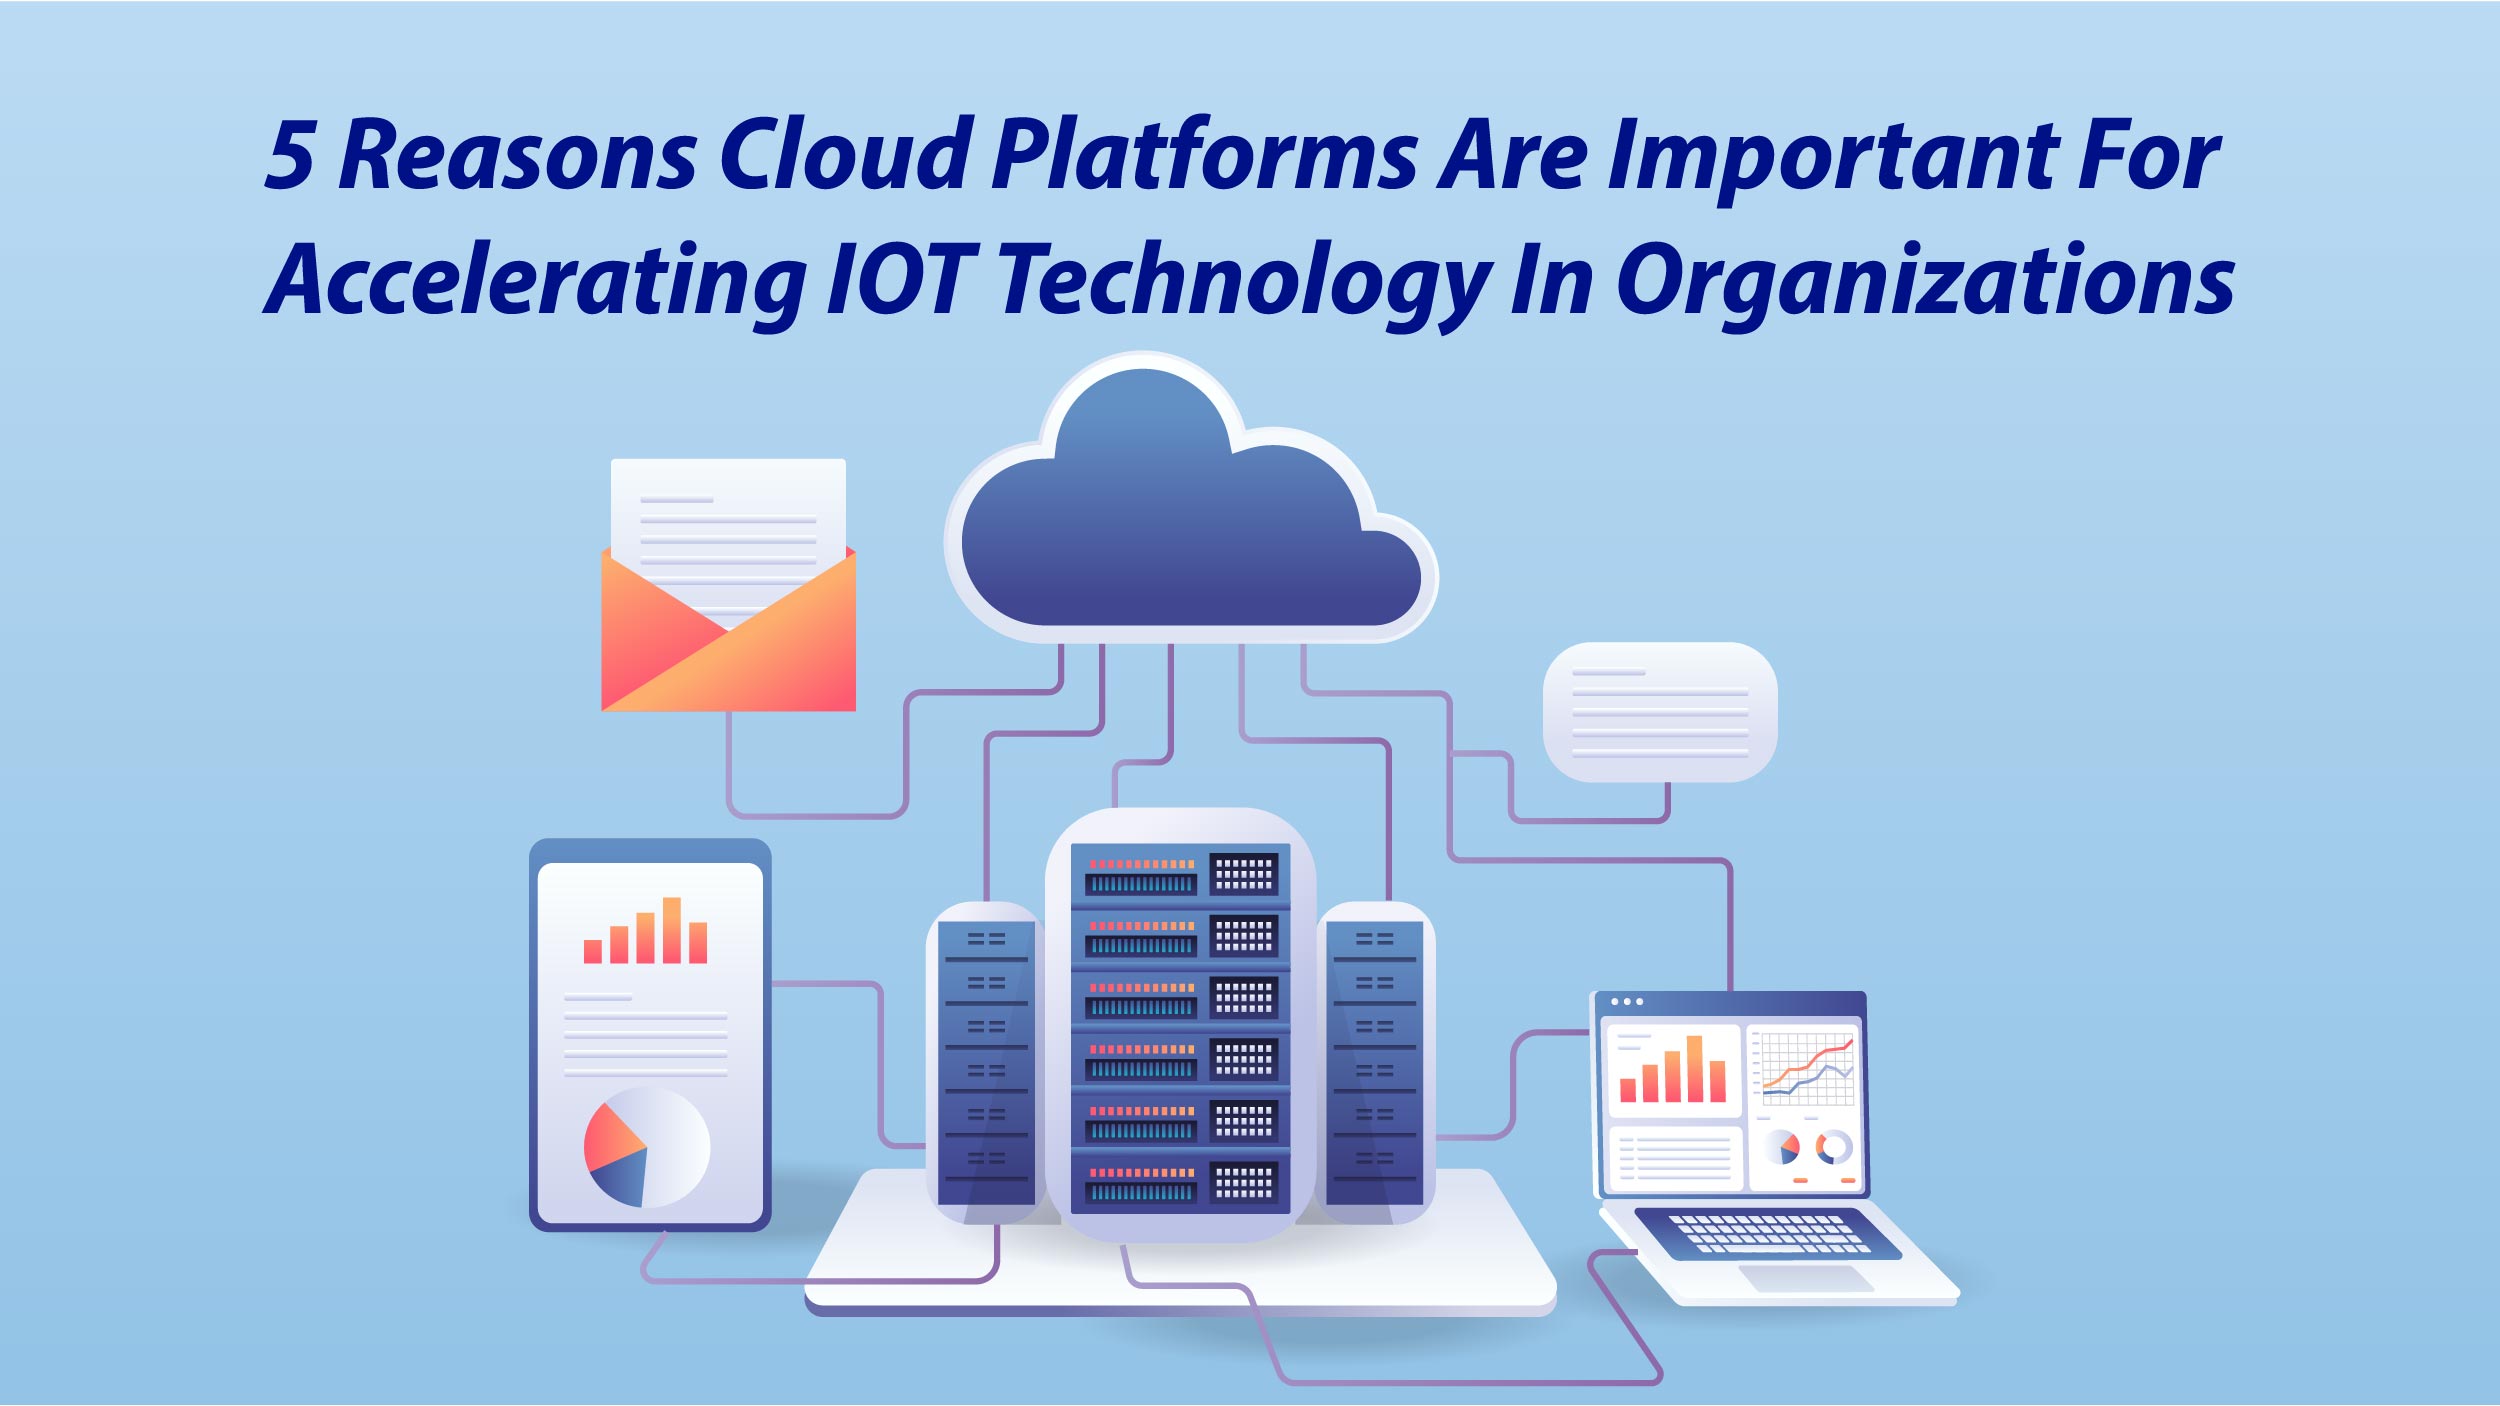 Why are Cloud Platforms Important for Accelerating IOT Technology in Organizations?